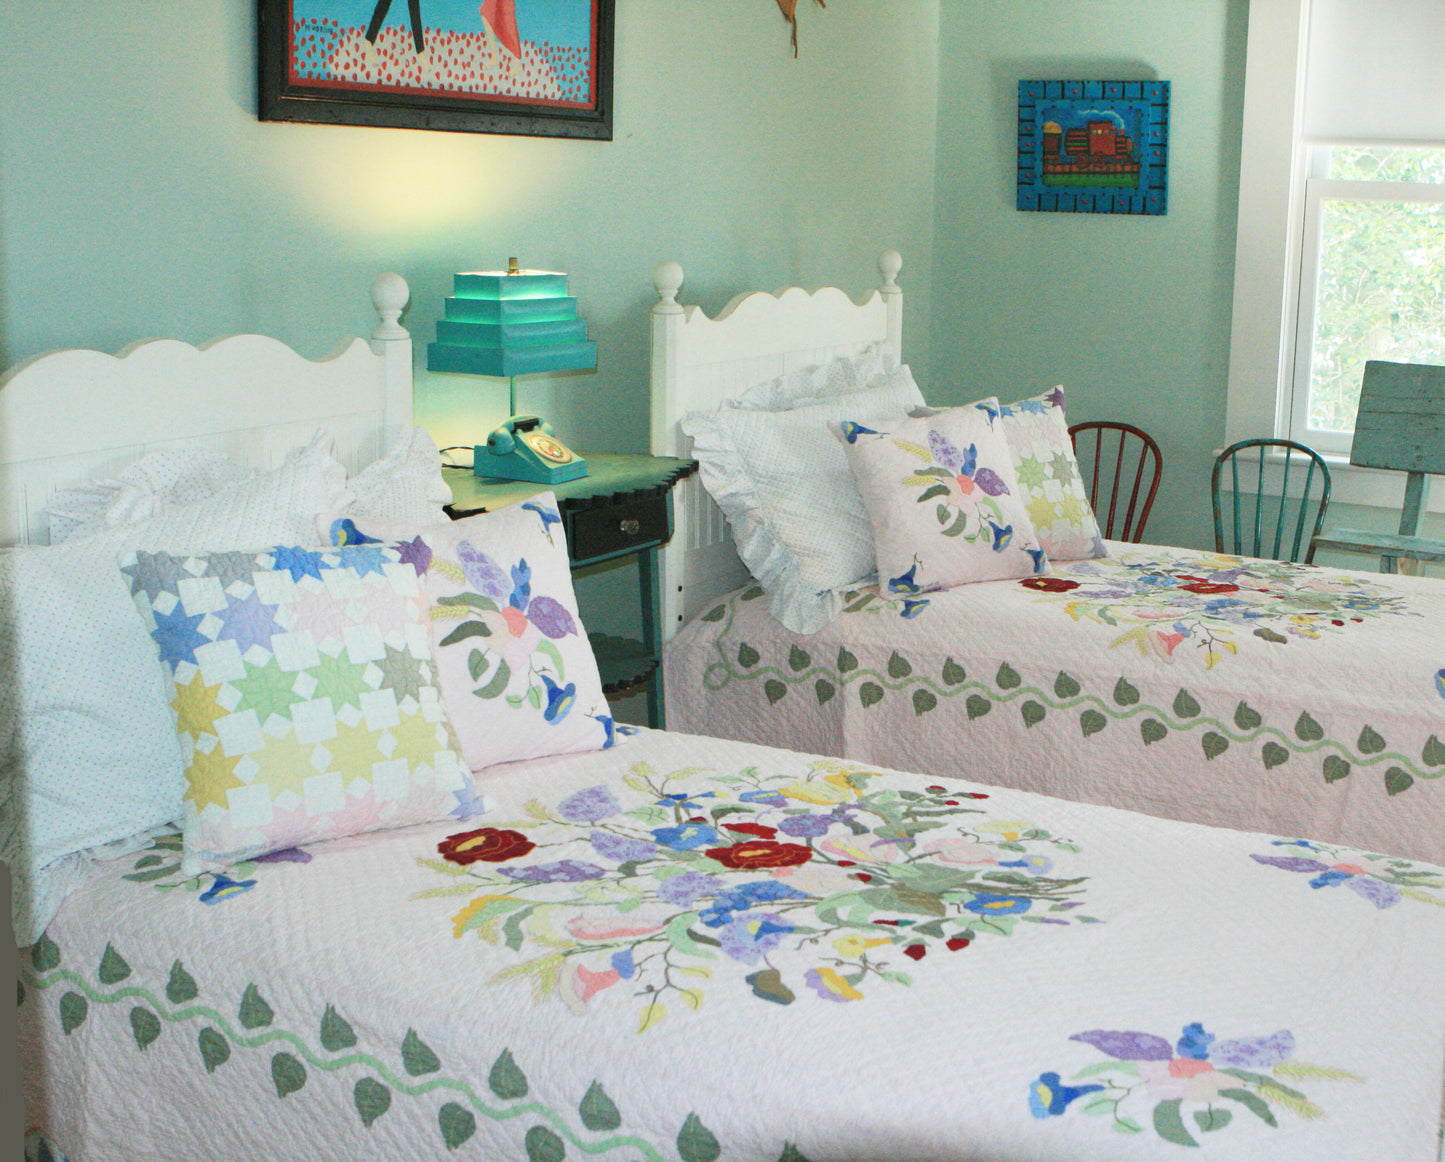 "Summertime" in Rose Twin Quilt 64" x 85"